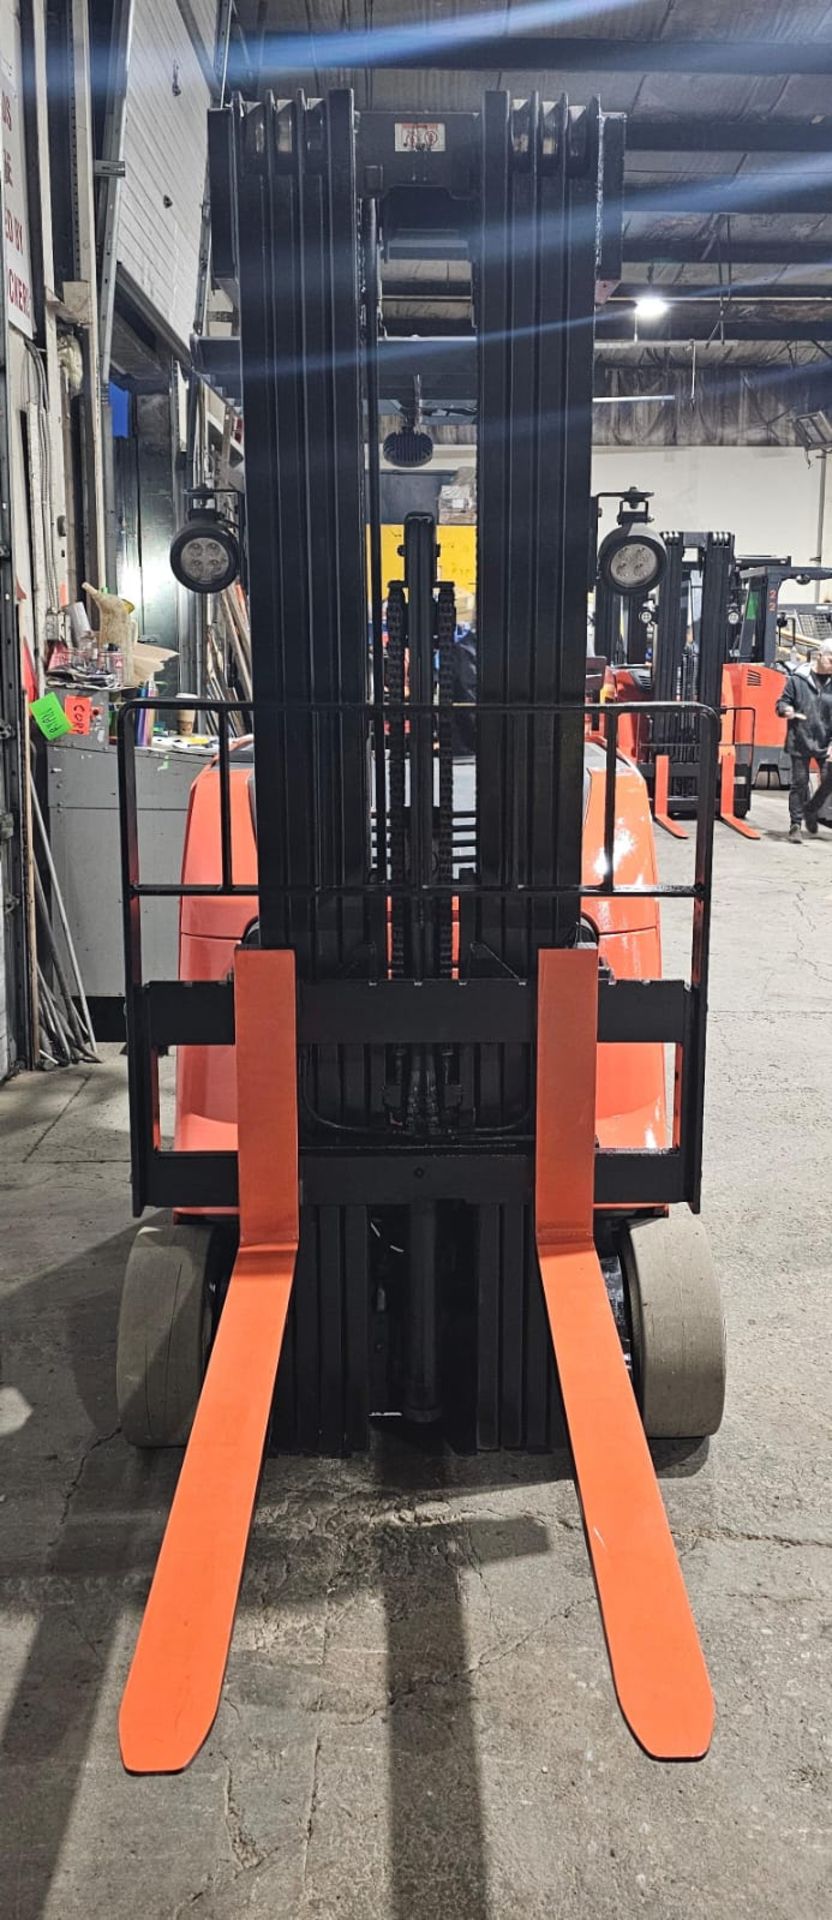 2017 Toyota 4,000lbs Capacity Forklift Electric 36V with sideshift & 4-STAGE MAST 276" max load - Image 8 of 9